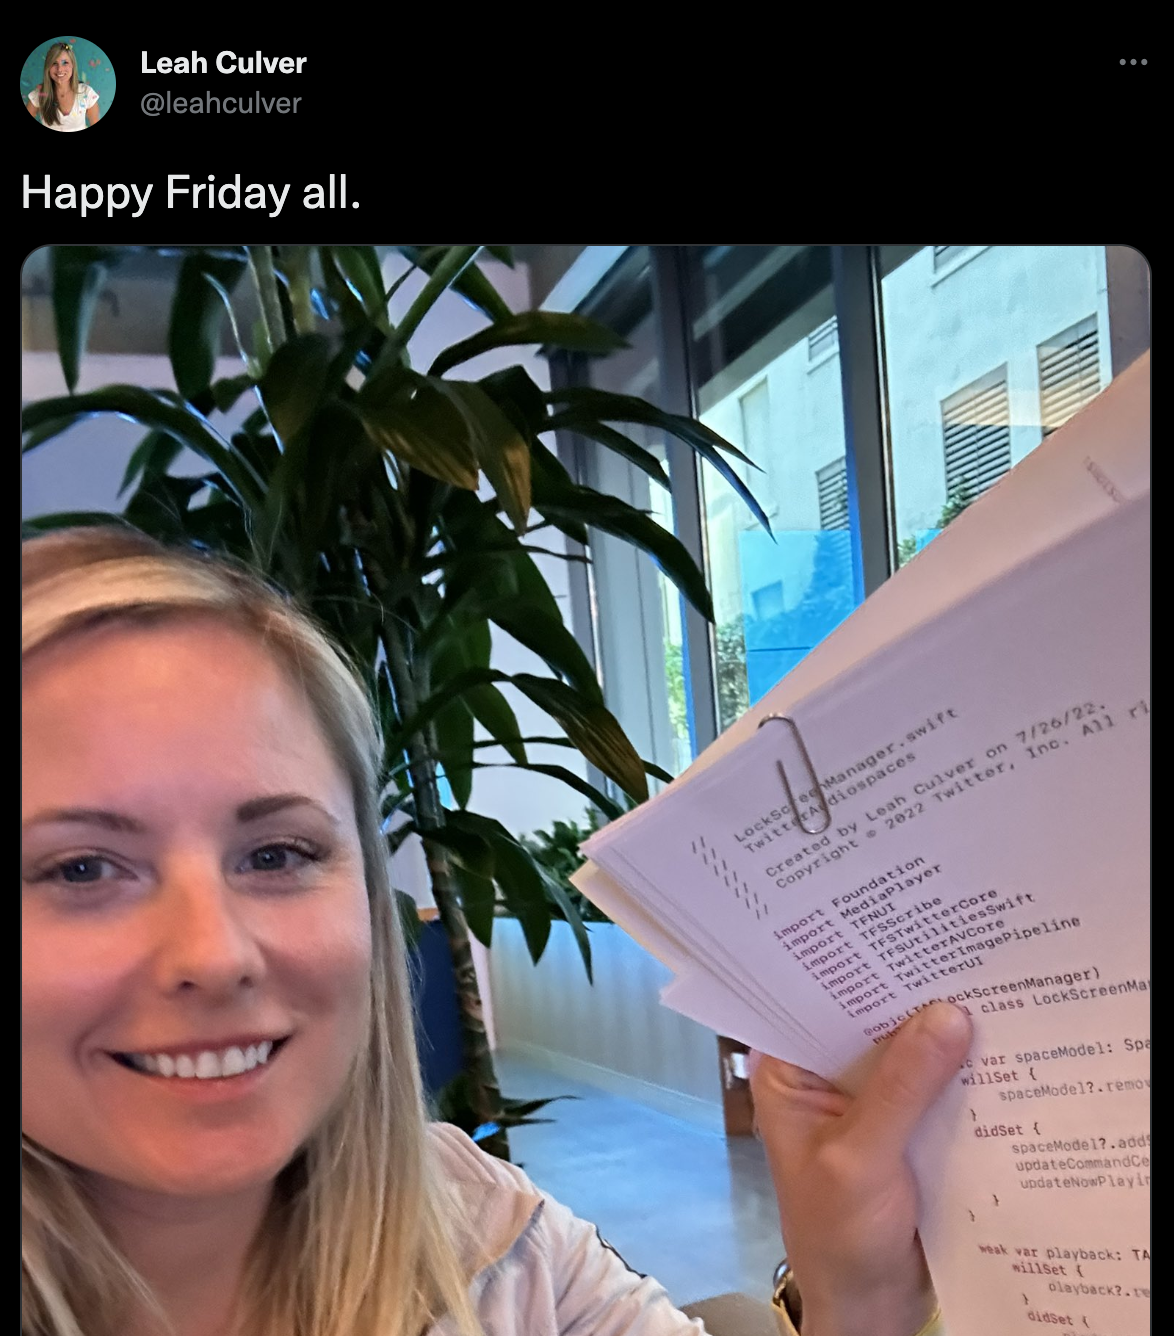 Engineer showing printed out source code wishing a happy friday